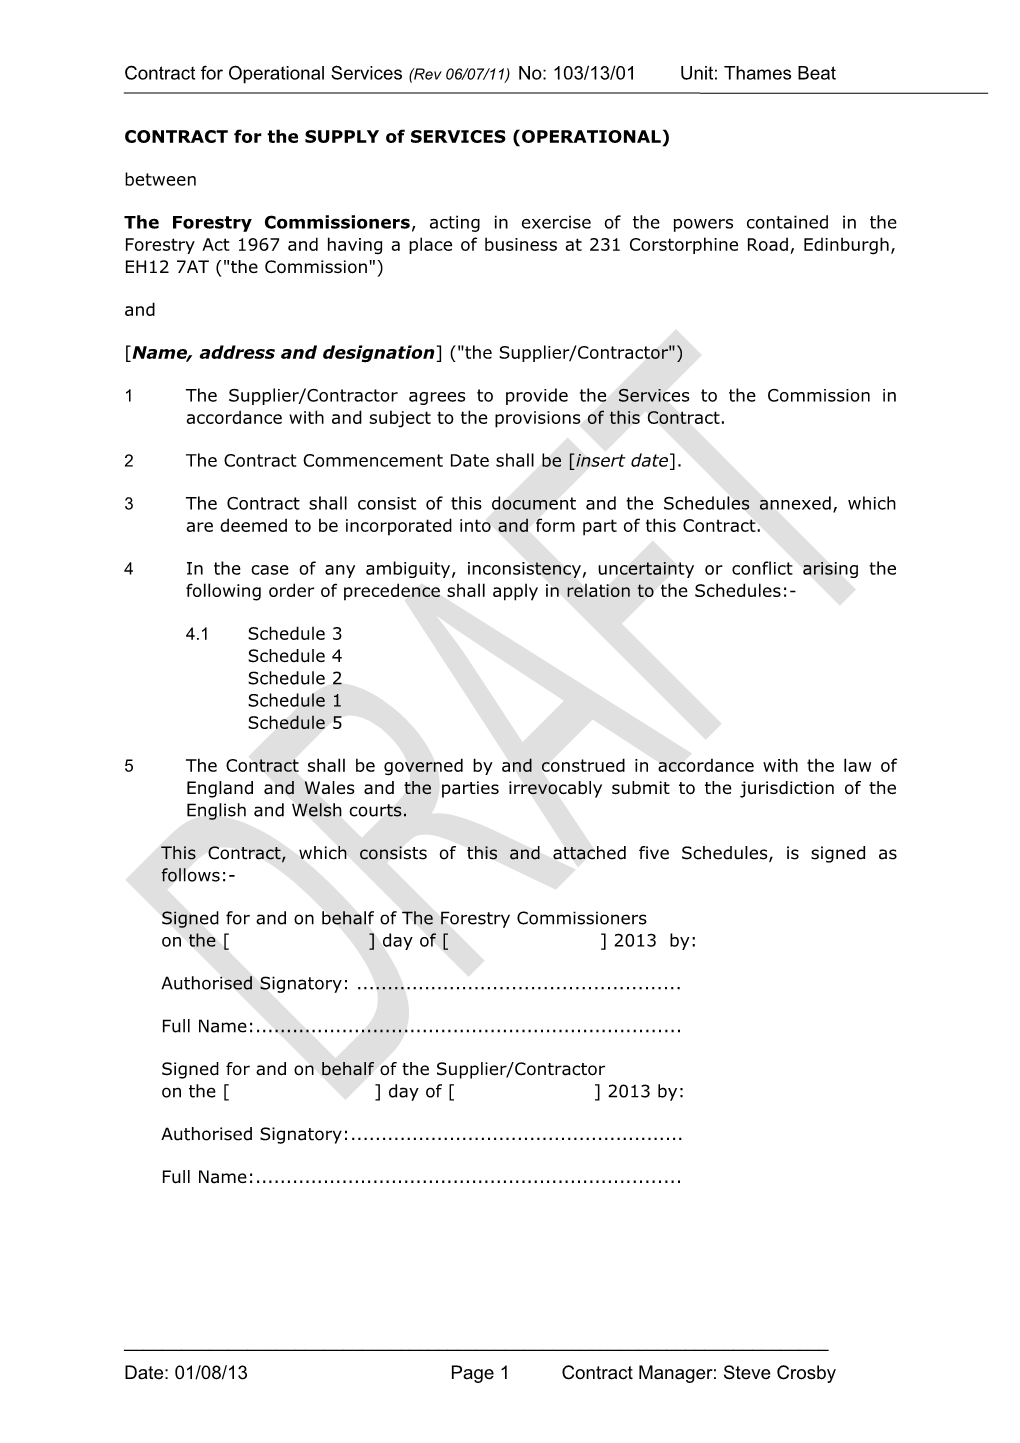 CONTRACT for the SUPPLY of SERVICES (OPERATIONAL)